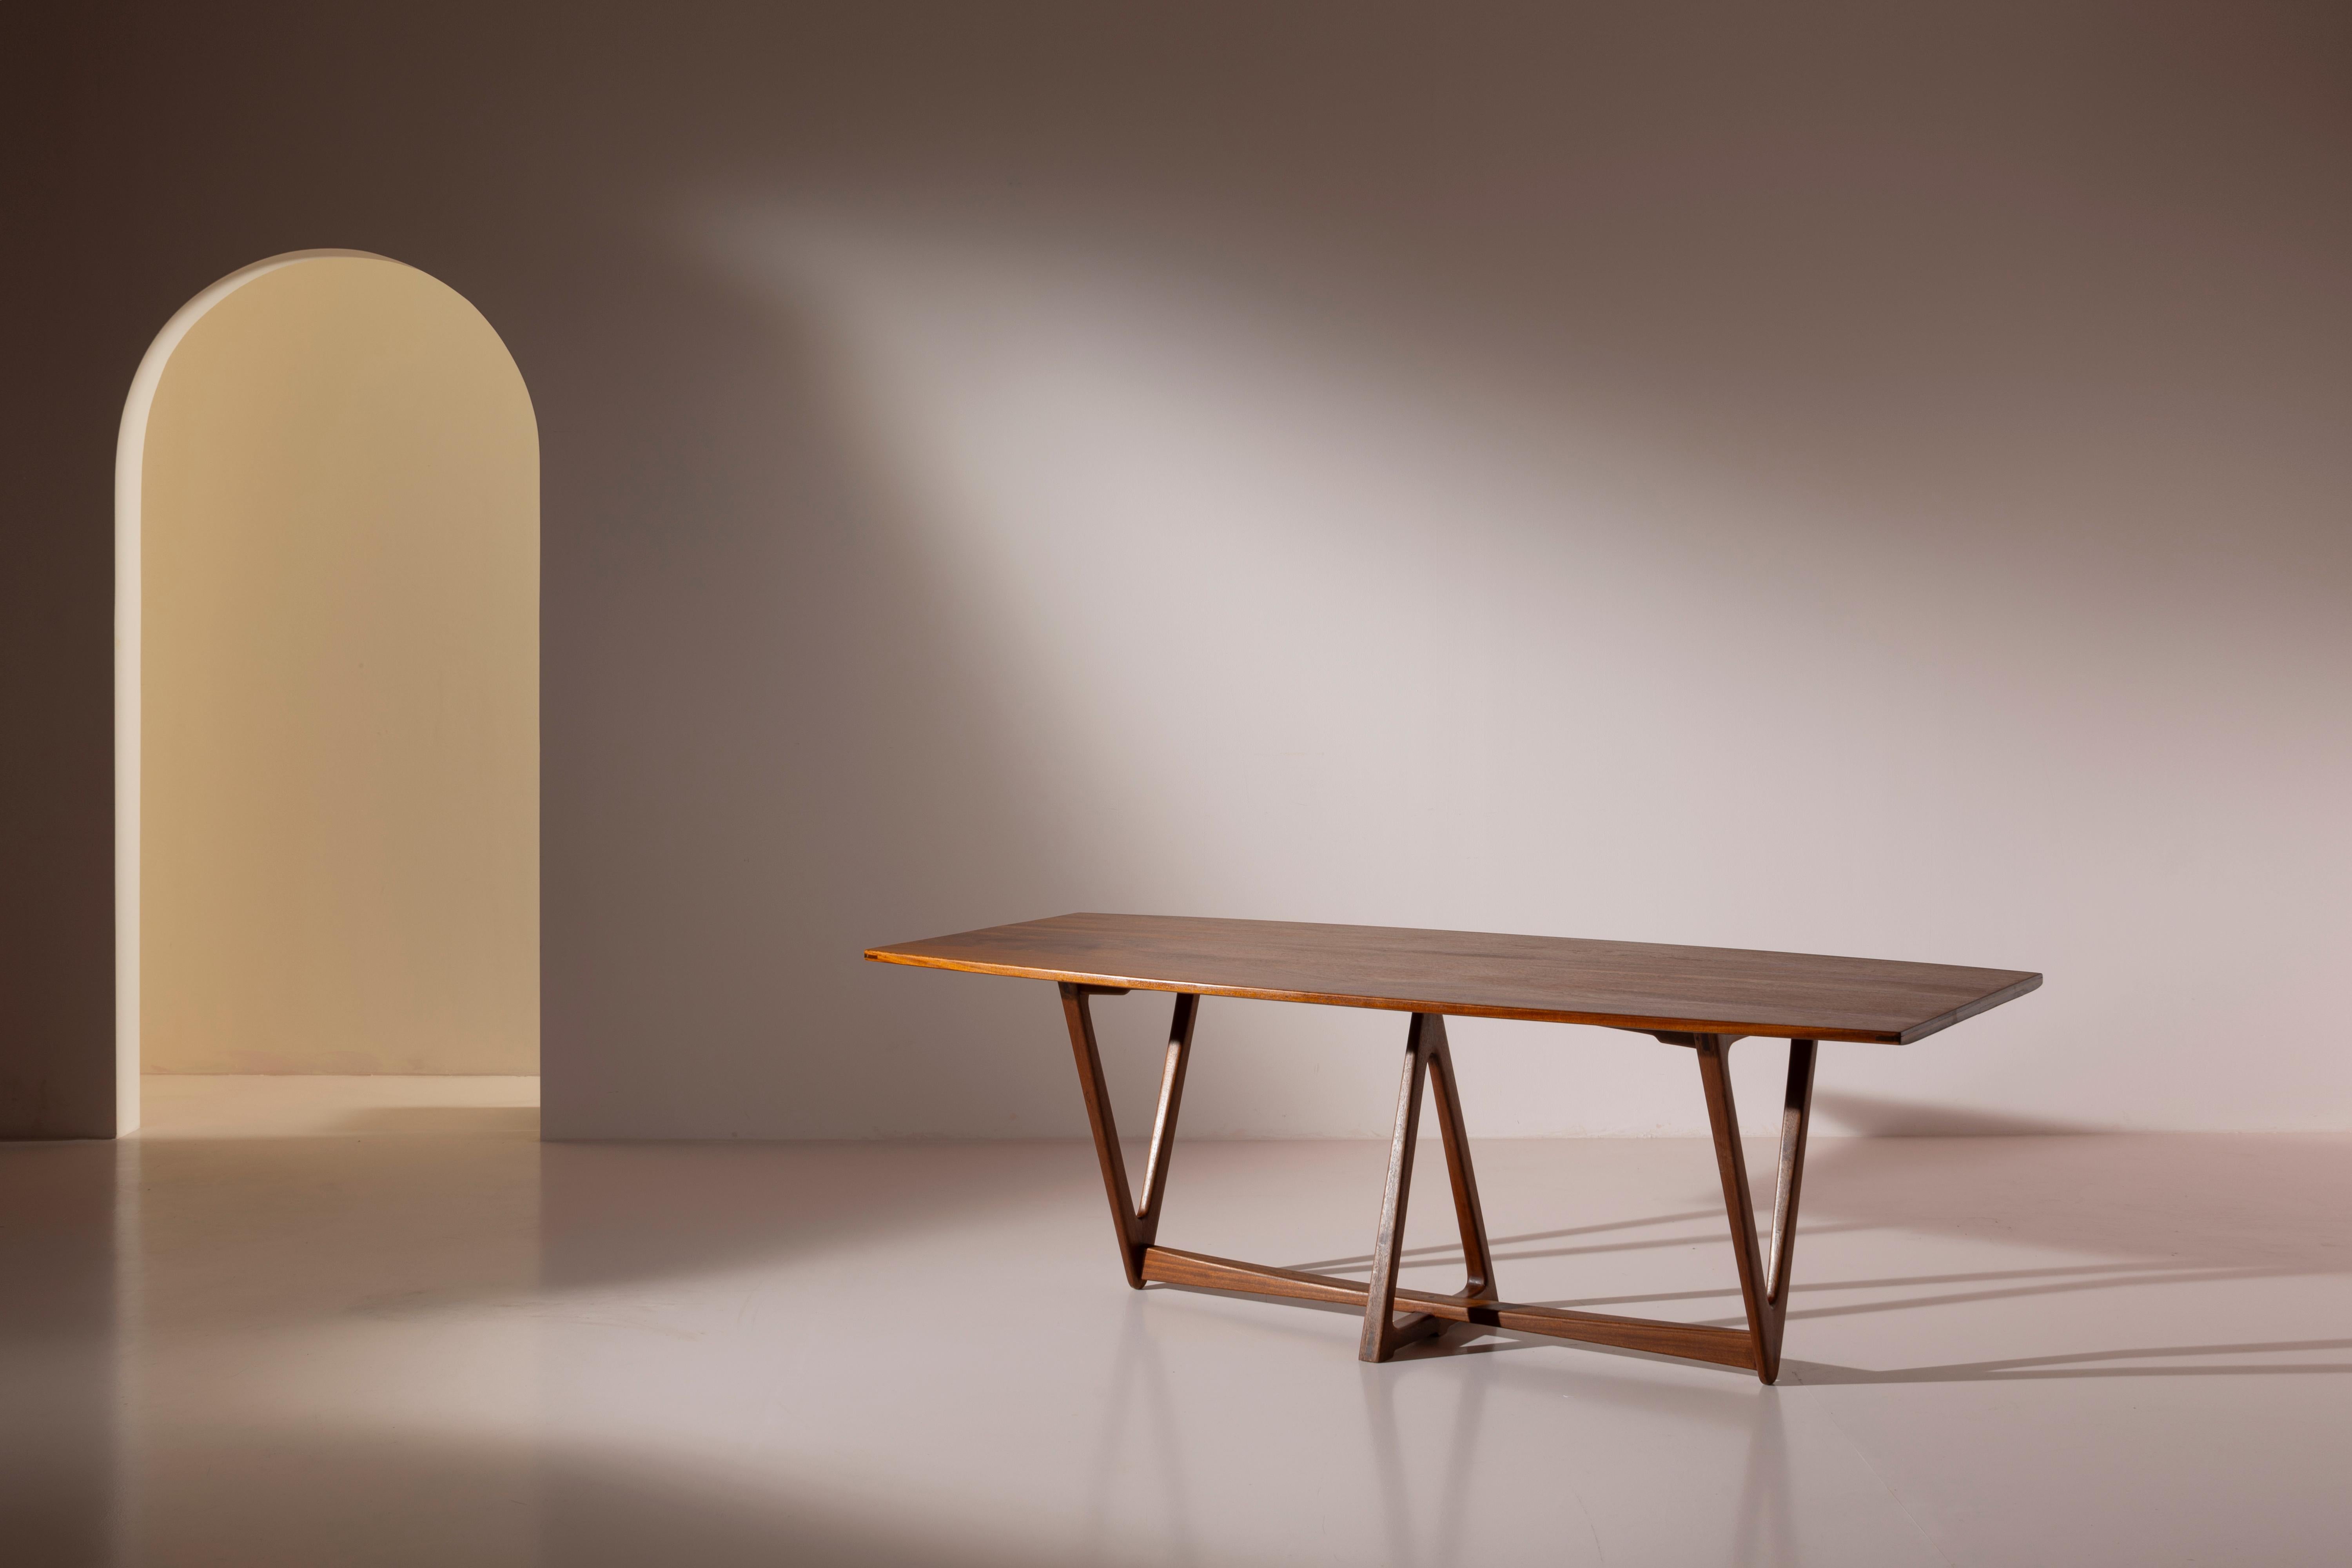 A unique and elegant dining table crafted from solid teak, originating from Italy in the 1950s. 

Perfect for adorning a generous hospitality space, this table stands out for its high-quality materials and meticulous craftsmanship. Its distinctive